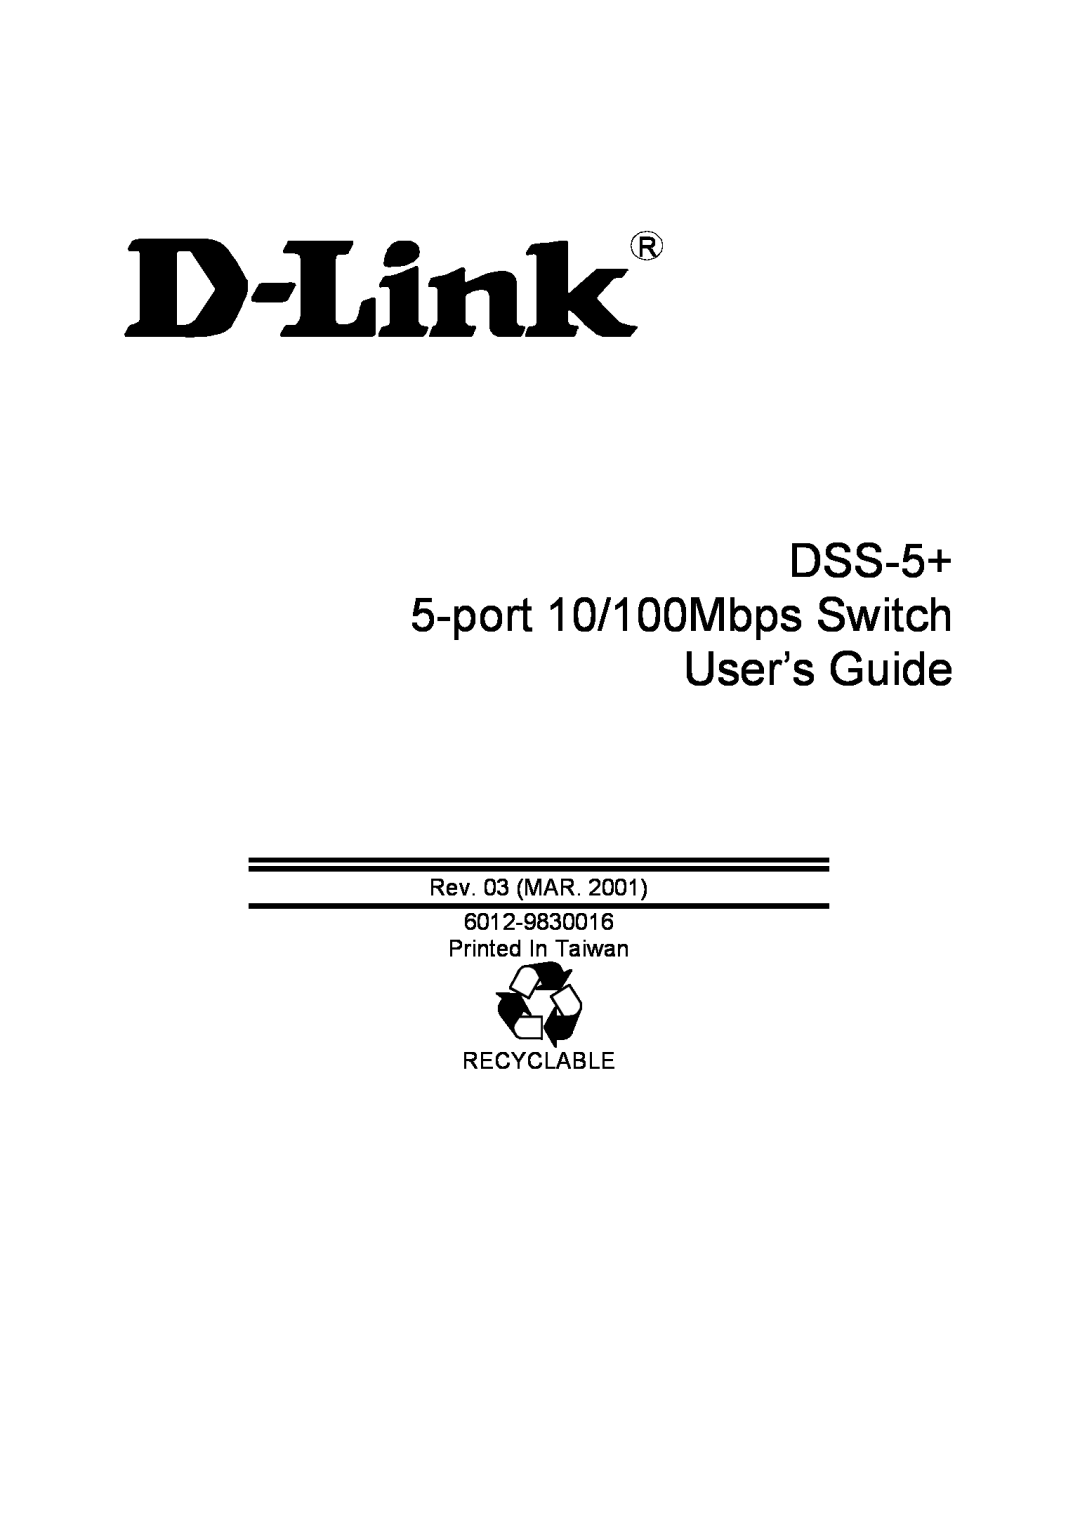 D-Link manual DSS-5+ 5-port 10/100Mbps Switch User’s Guide, Rev. 03 MAR 6012-9830016 Printed In Taiwan RECYCLABLE 